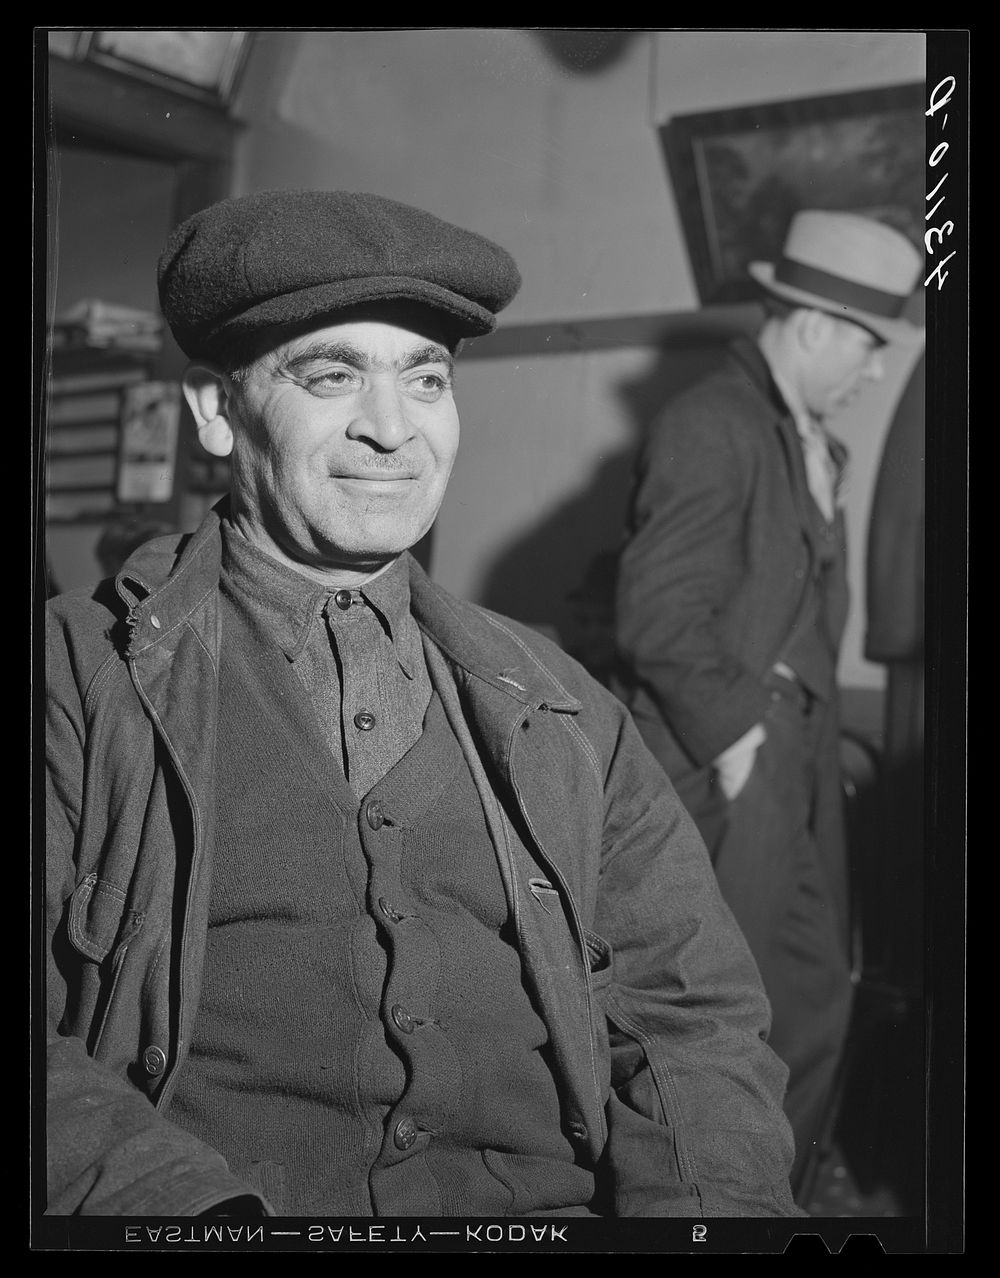 A Greek steelworker in Aliquippa, Pennsylvania. Sourced from the Library of Congress.